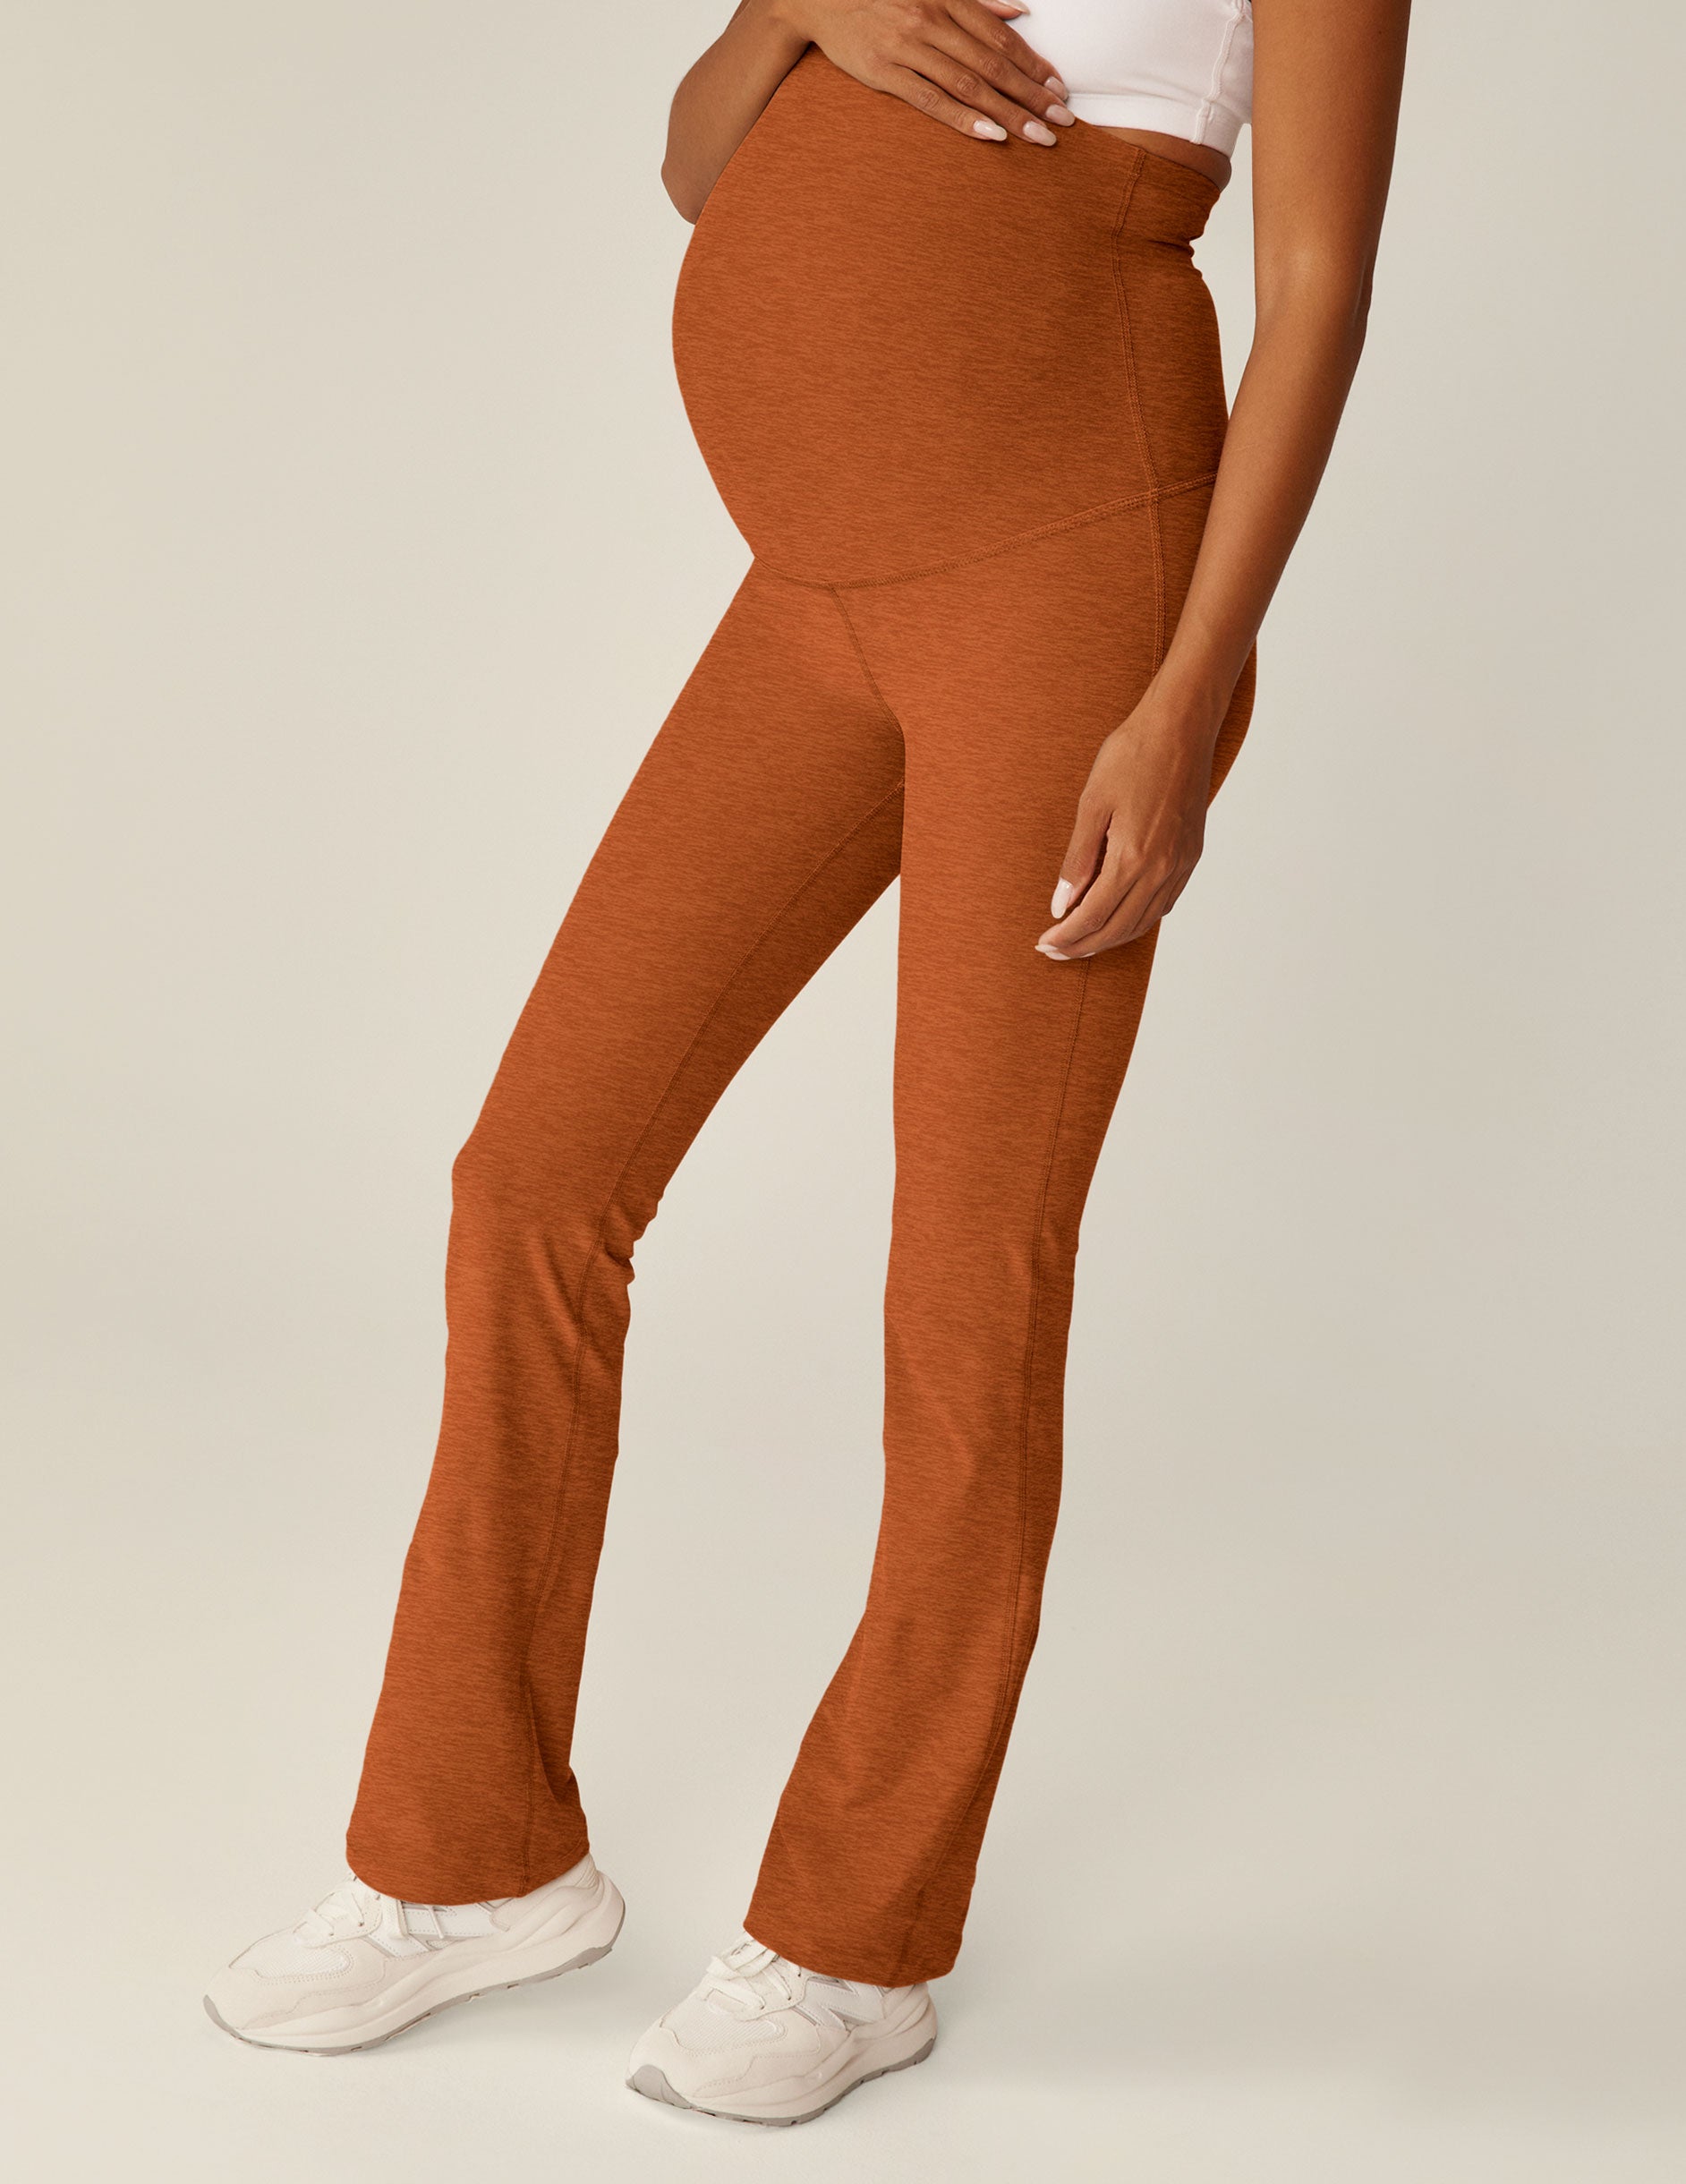 brown bootcut style maternity pants. 